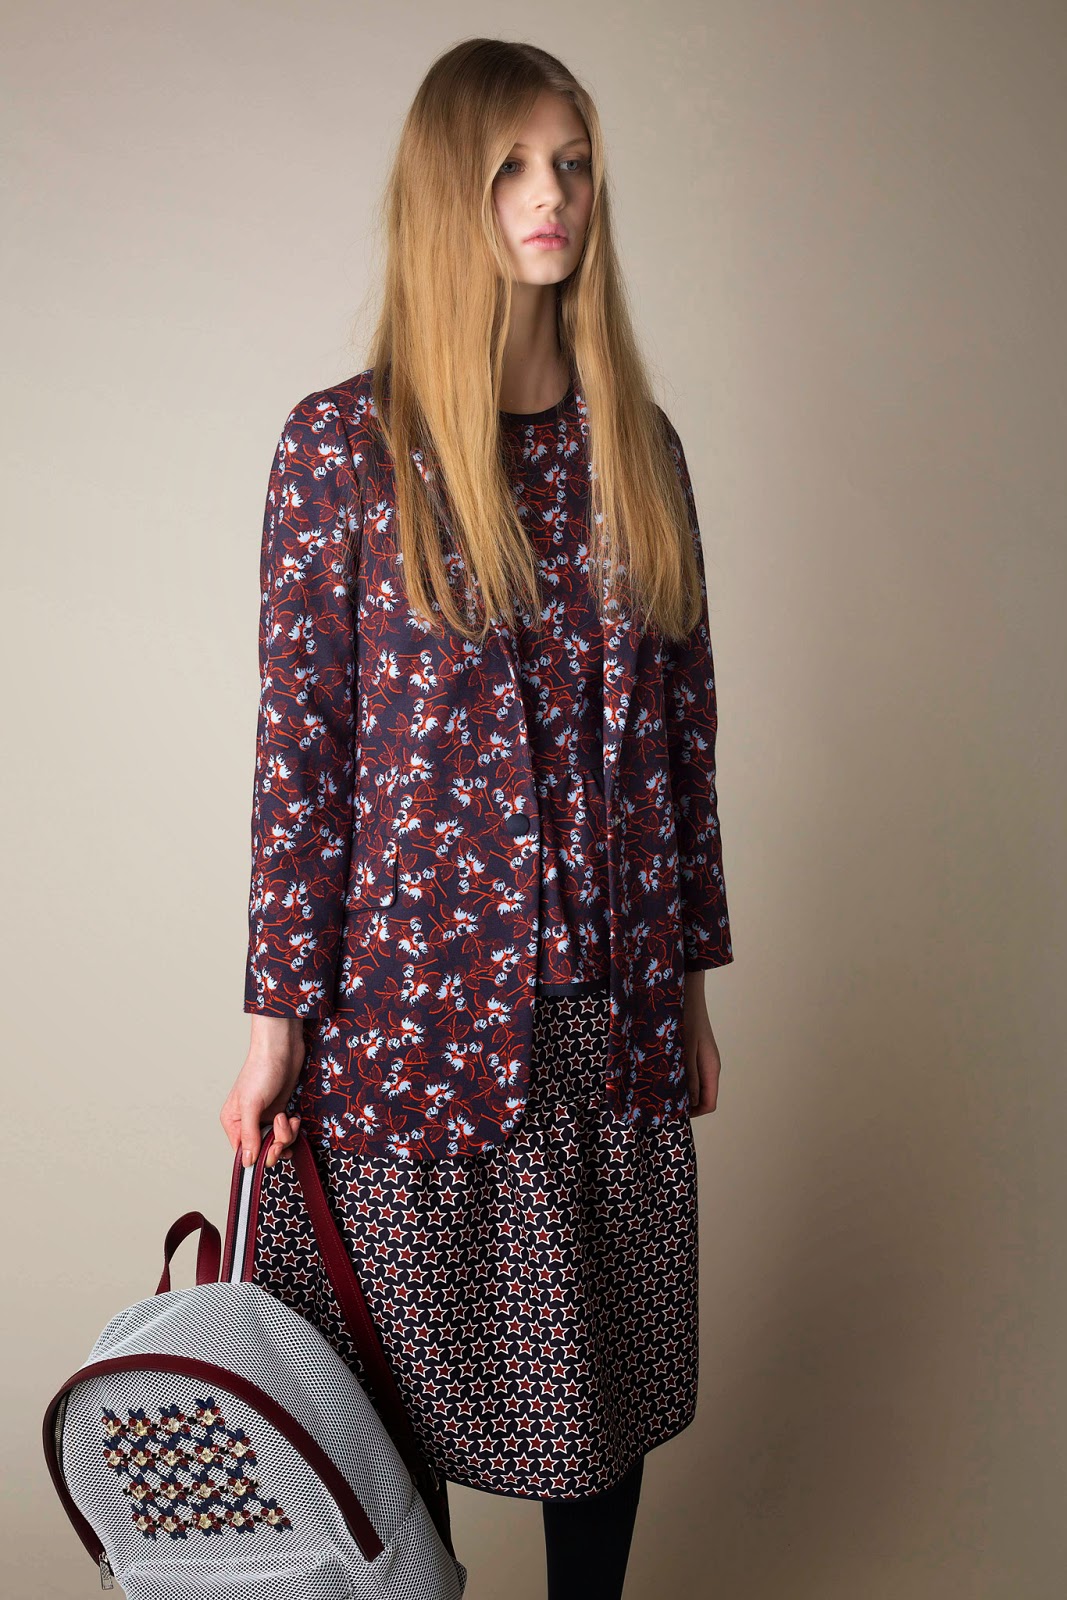 Serendipitylands: MOTHER OF PEARL COLLECTION PRE-FALL 2015